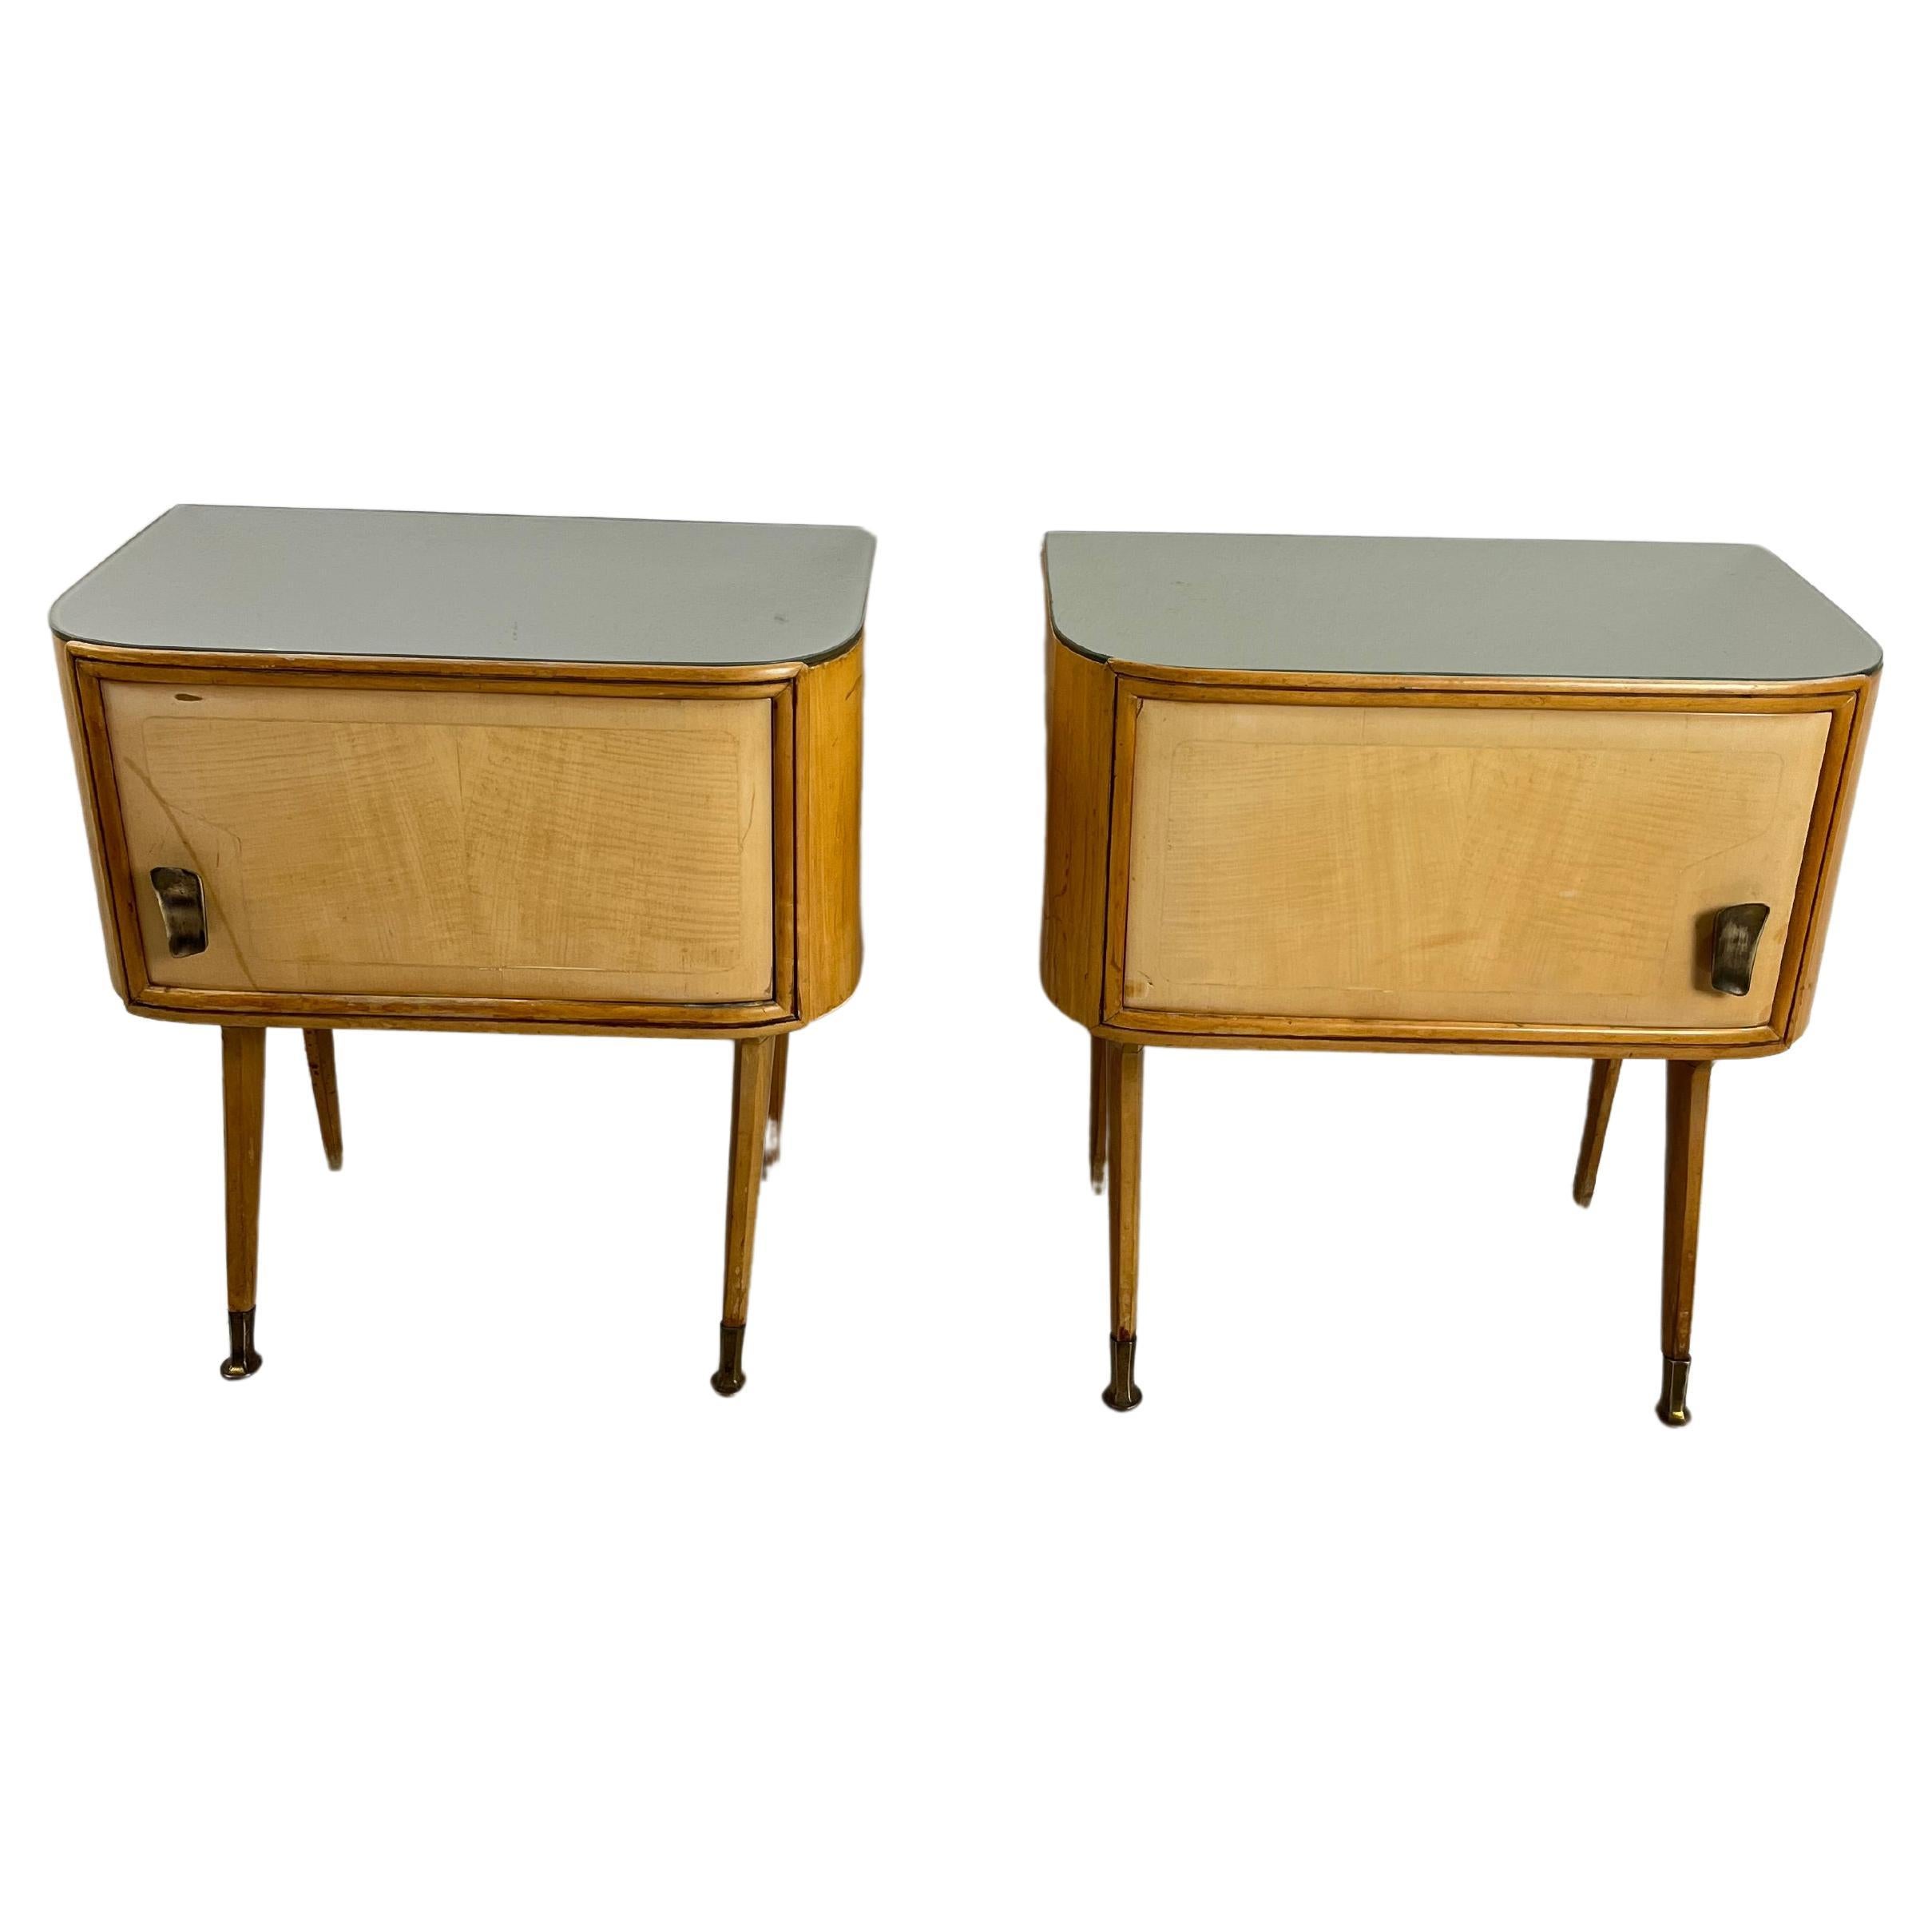 Set Of 2 Mid-Century Bedside Tables Attributed to Vittorio Dassi 1959 For Sale